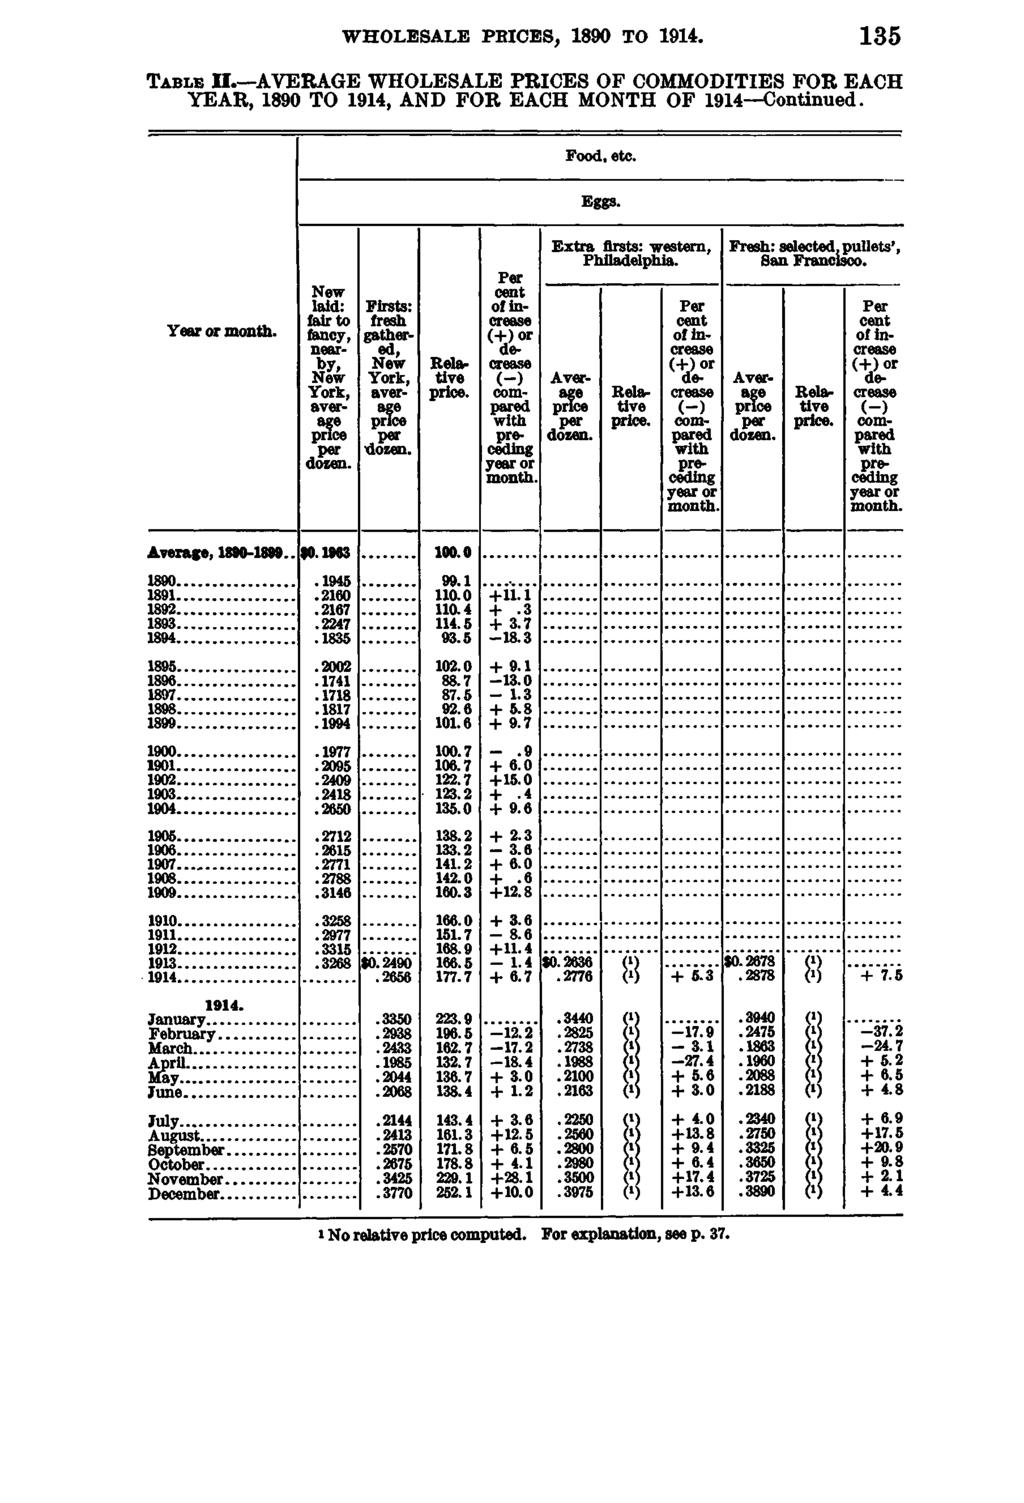 WHOLESALE PRICES, 1890 TO 135 T a b l e I I. AVERAGE WHOLESALE PRICES OF COMMODITIES FOR EACH YEAR, 1890 TO 1914, AND FOR EACH MONTH OF 1914 Continued. Food, etc. Eggs.